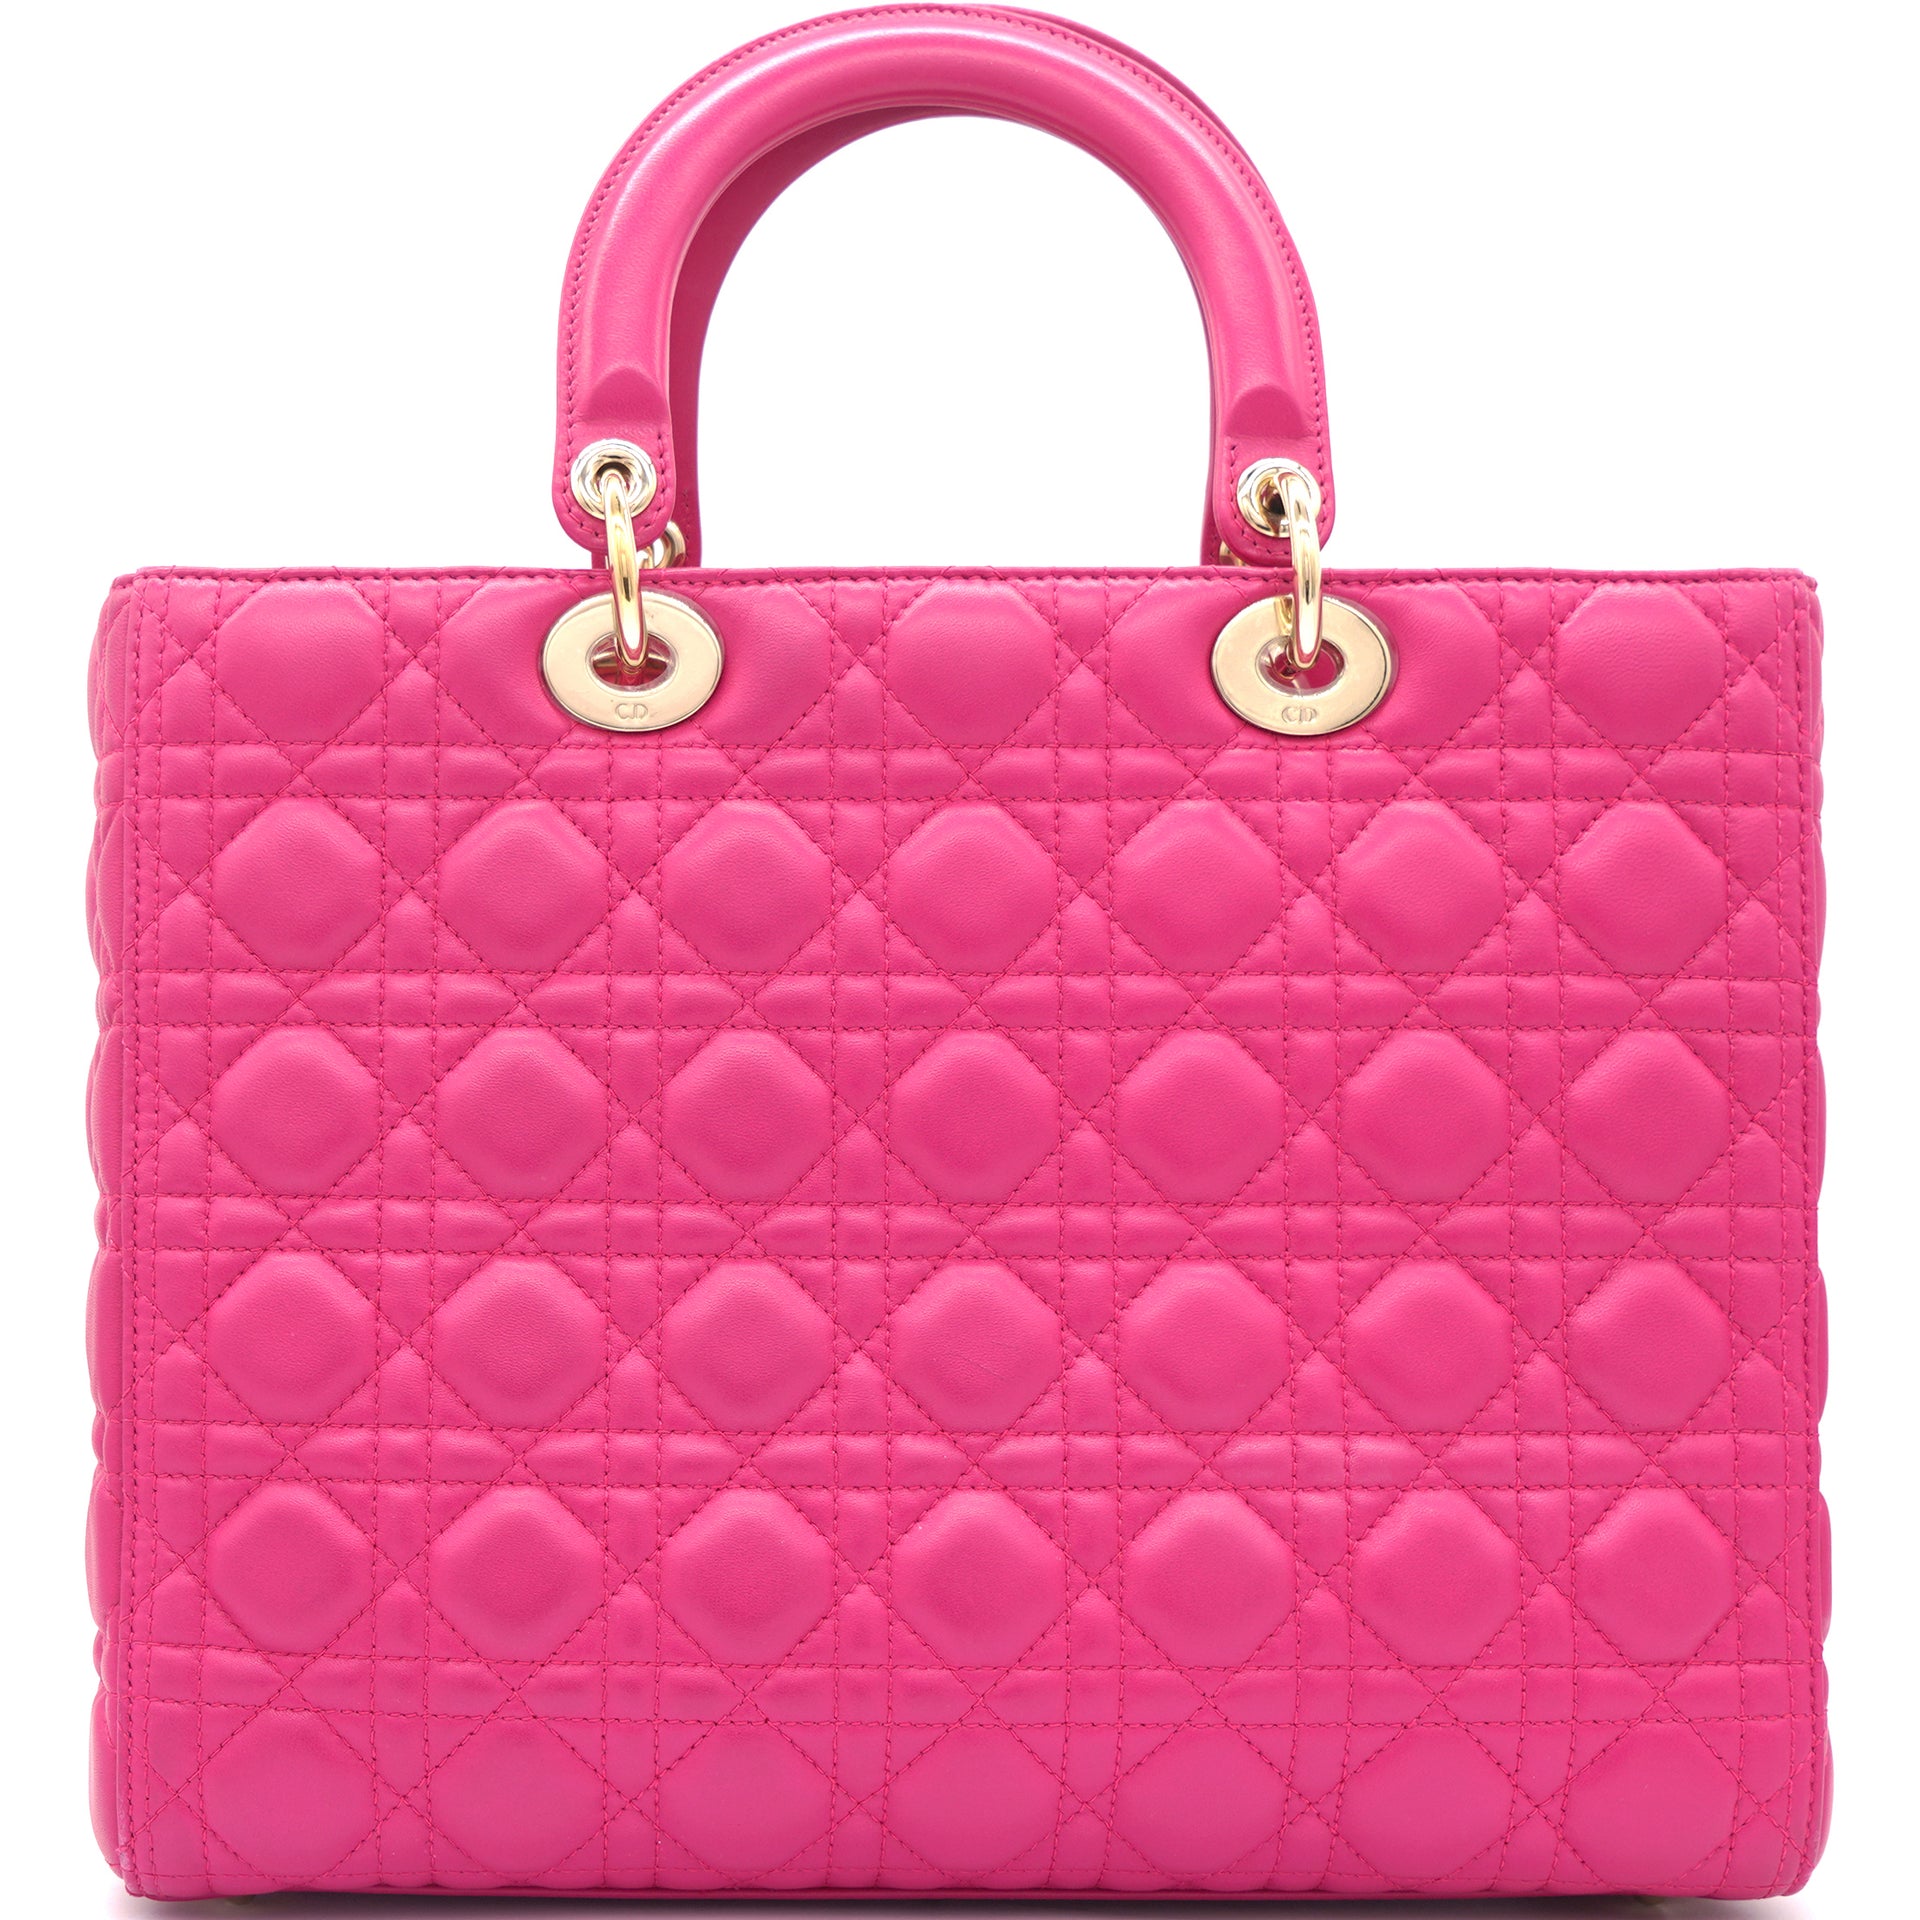 Christian Dior Pink Python Mini Lady Dior Bag CoDeal Price Picture